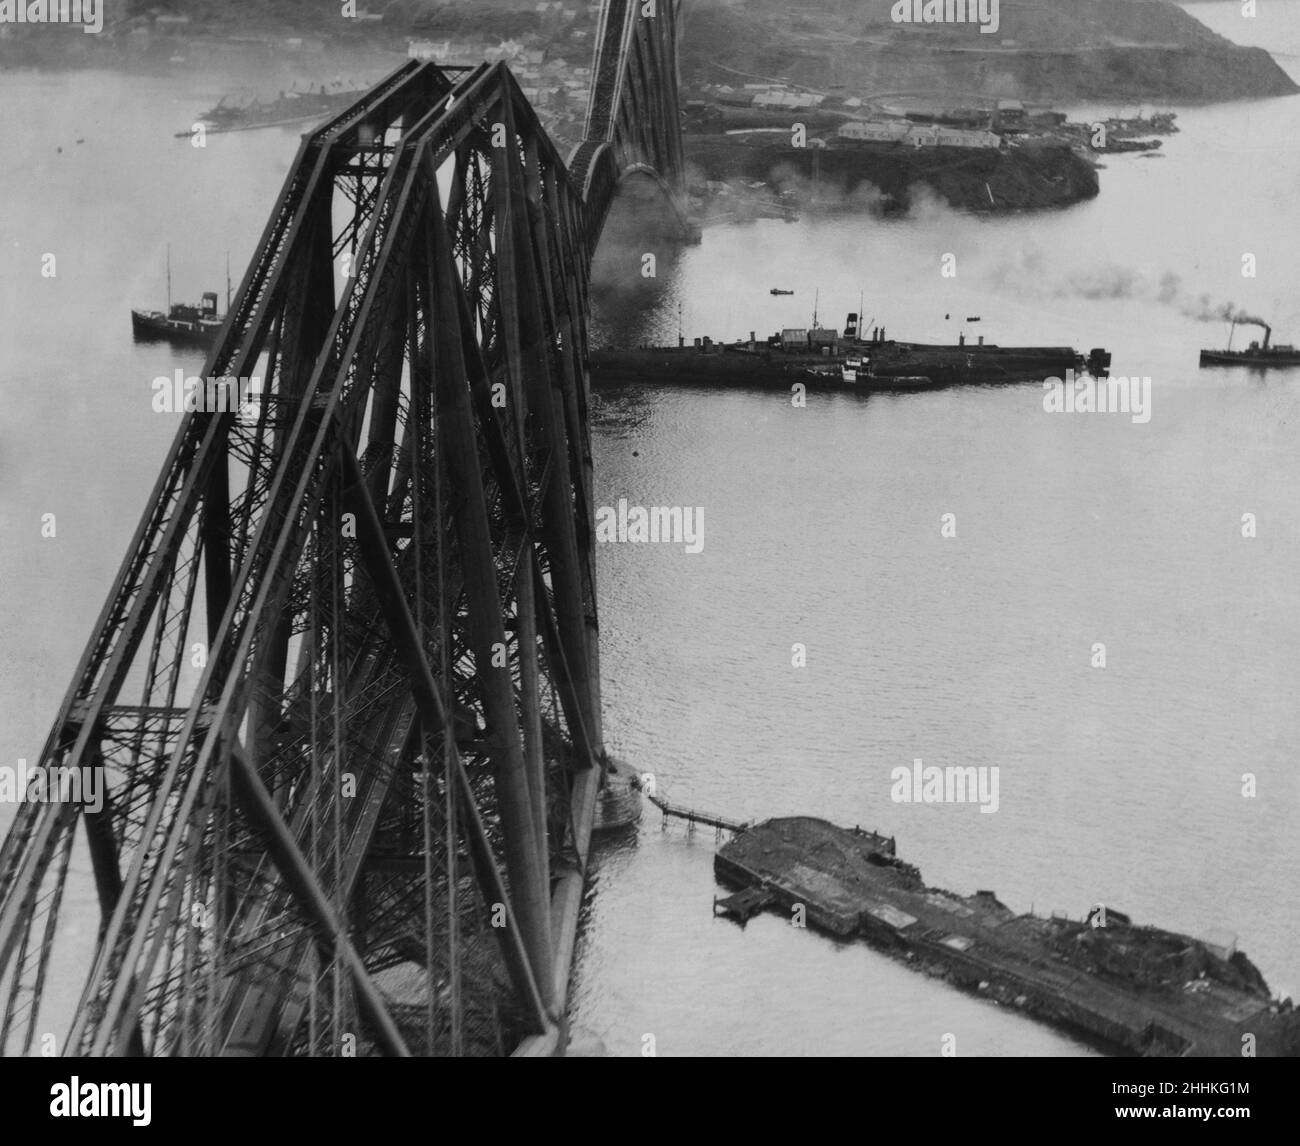 A picture taken from one of the S.M.T Travel Aerial Travel cabin moth planes when the former German battleship SMS Prinzregent Luitpold was being manoeuvred under the Forth Bridge on the way to Rosyth to be broken up. 12th May 1933. Stock Photo